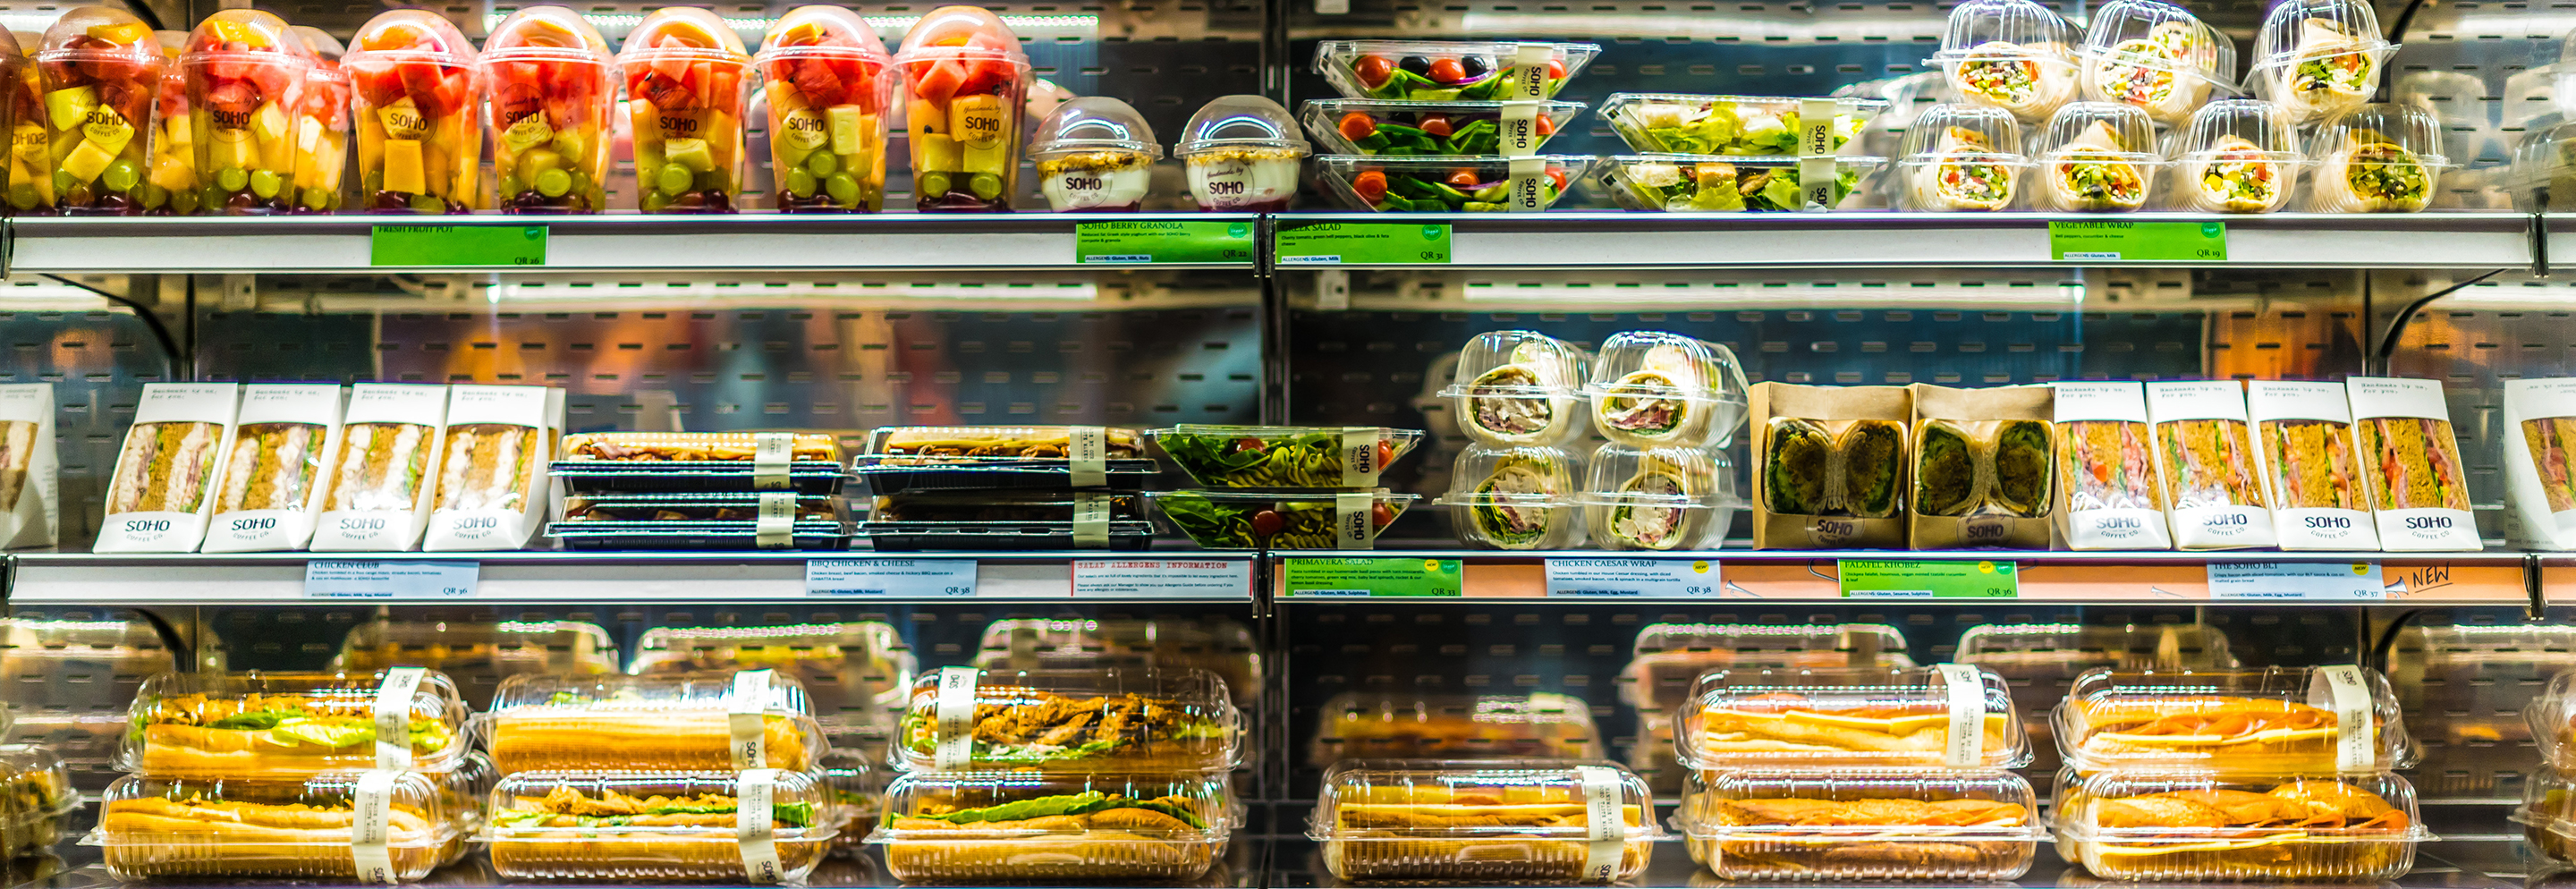 Keep Your Foodservice Business Running with Intermatic Refrigeration Solutions